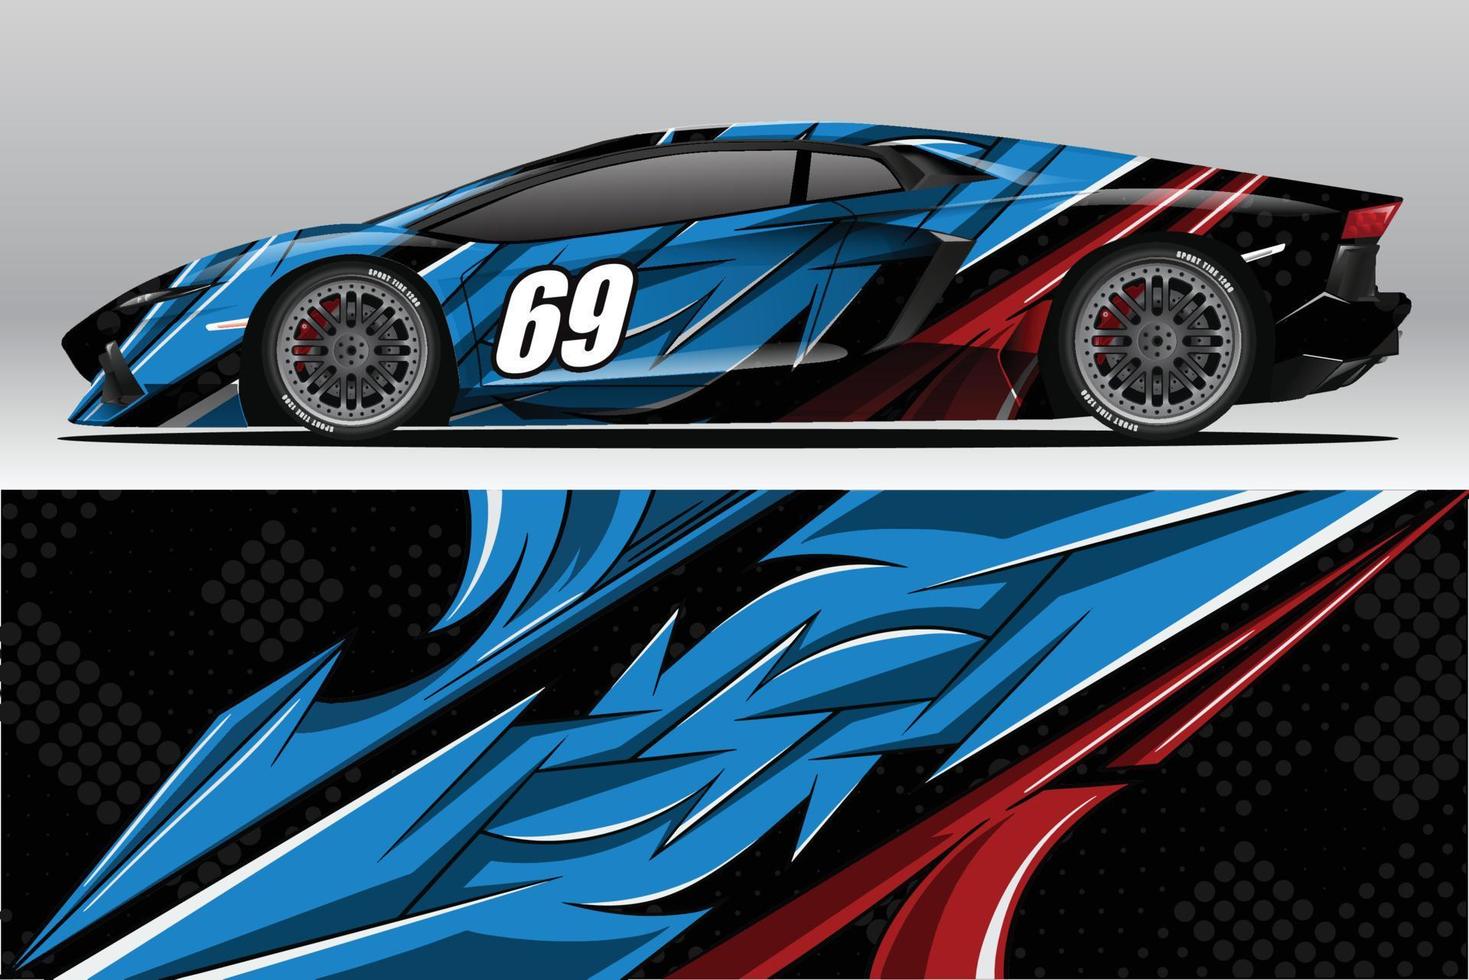 Car wrap decal designs for racing livery or daily car vinyl sticker vector